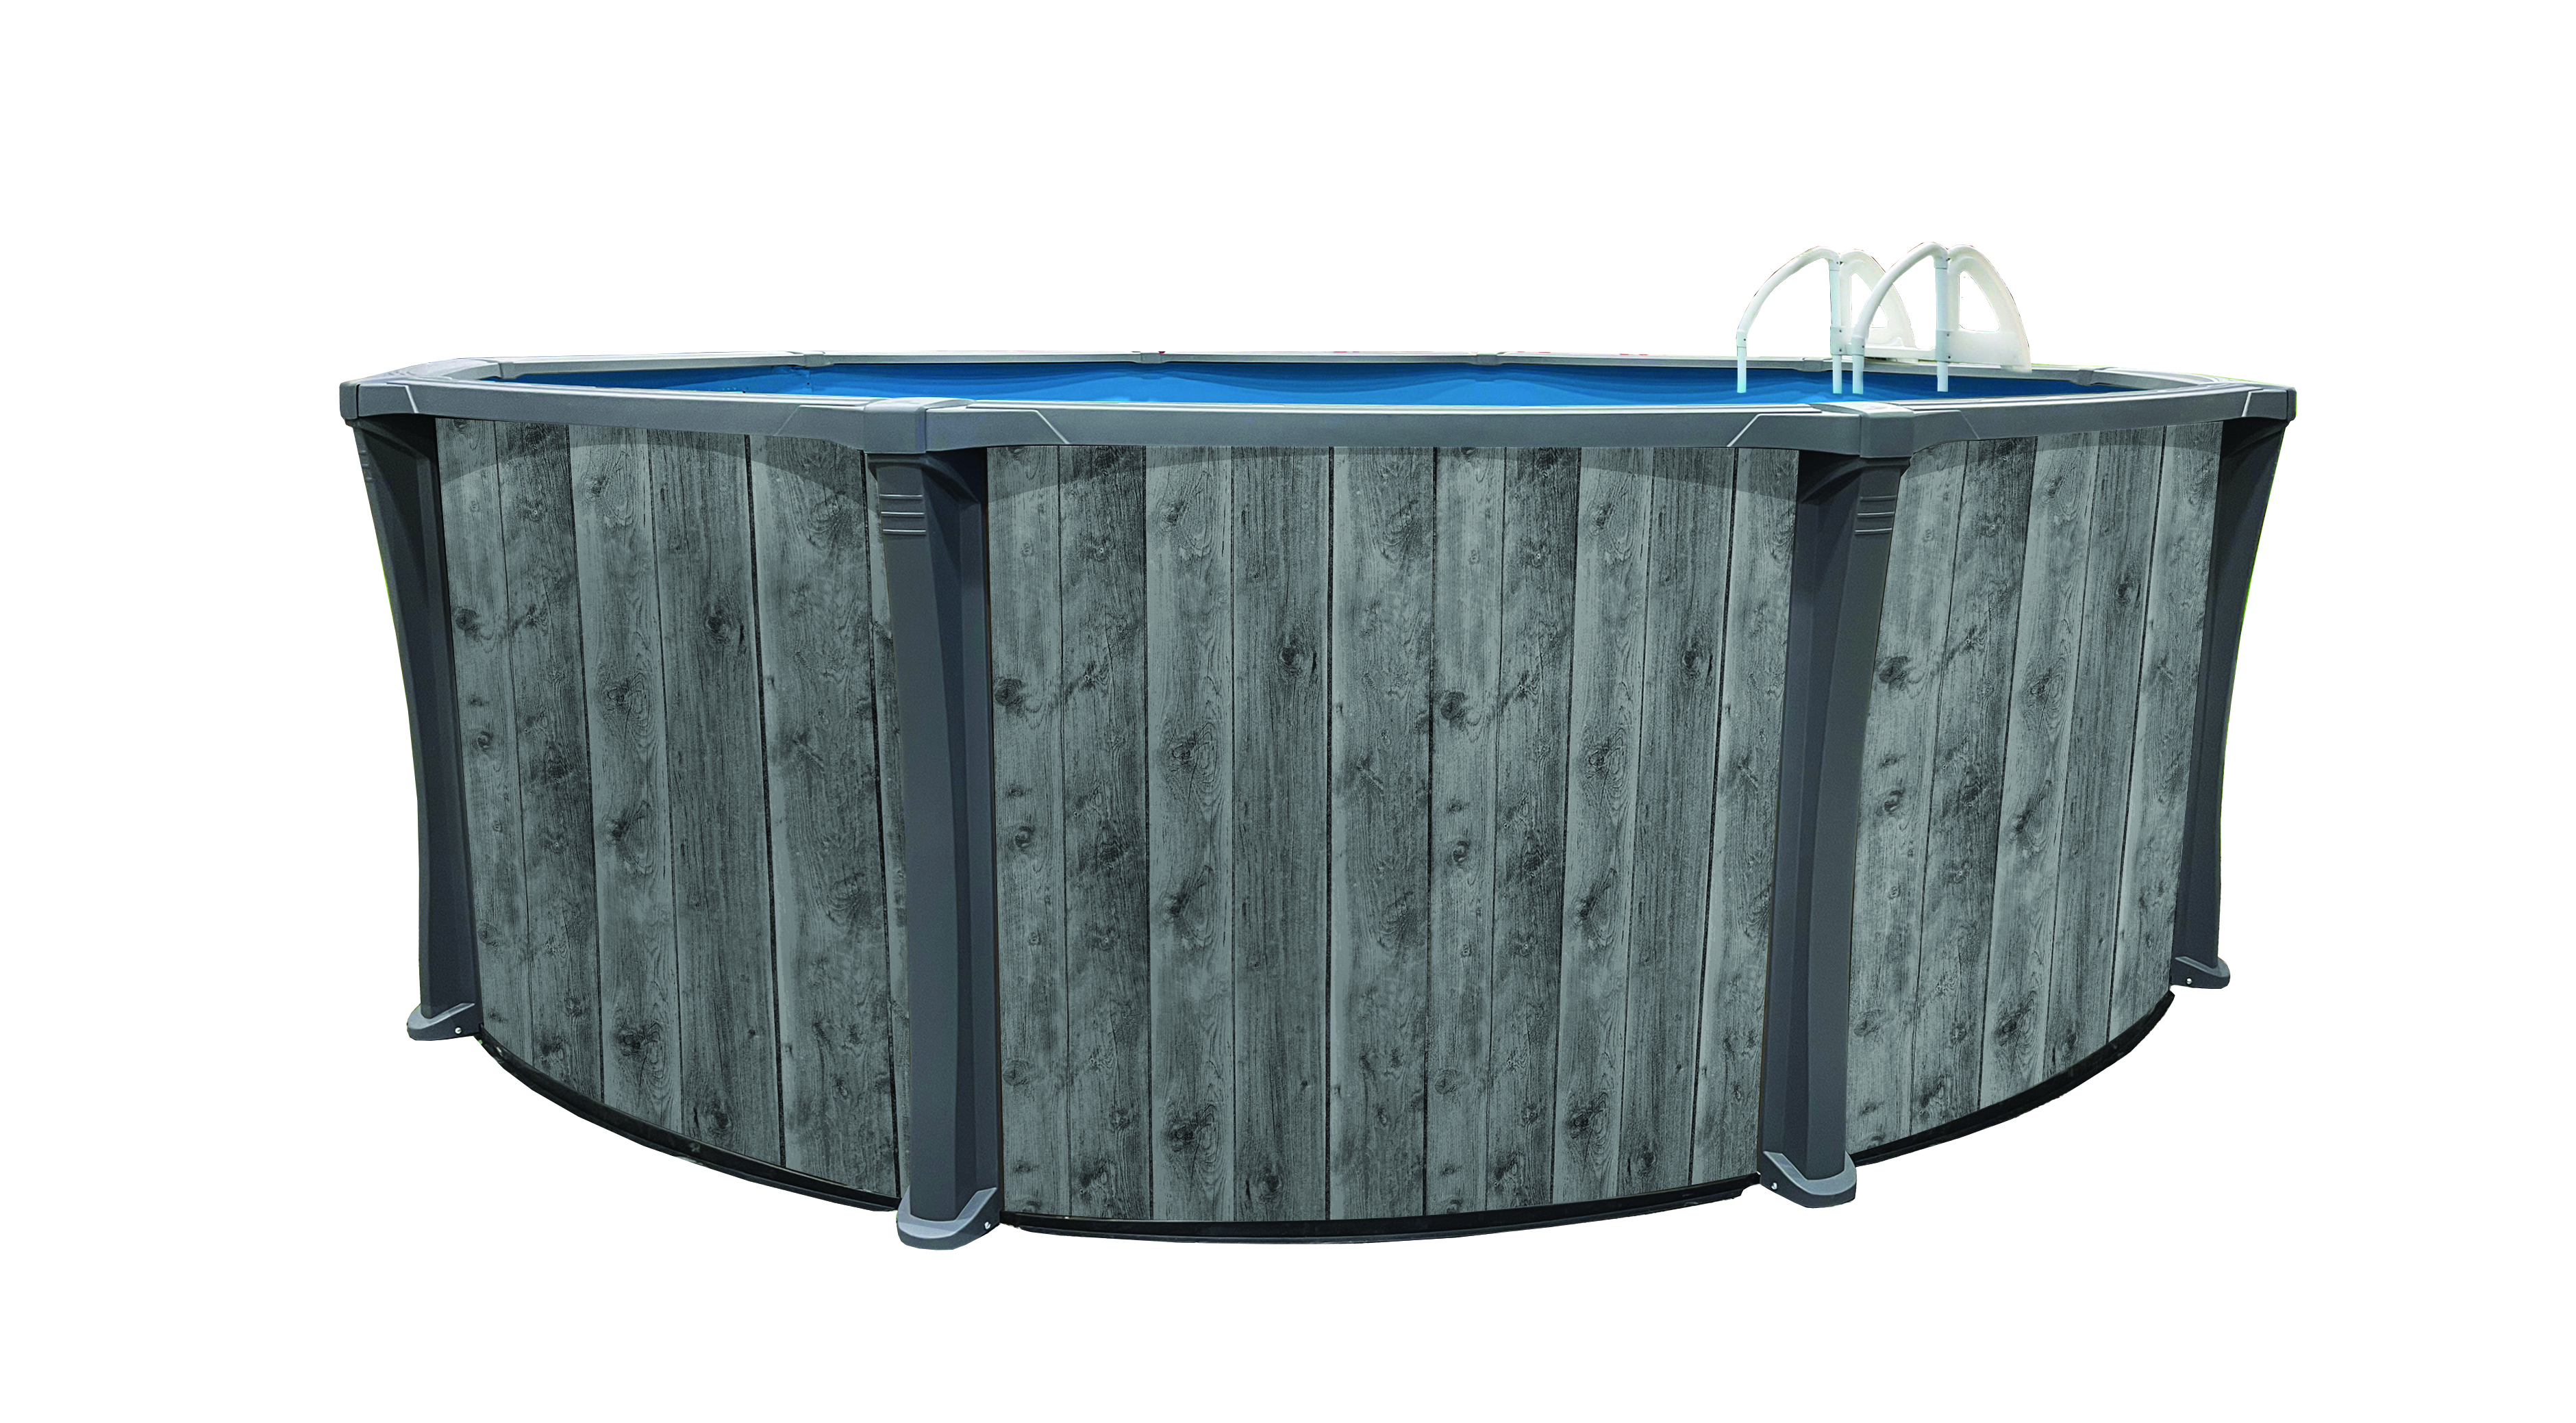 Wentworth 18 Ft Round Pool Only - MAYTRONICS